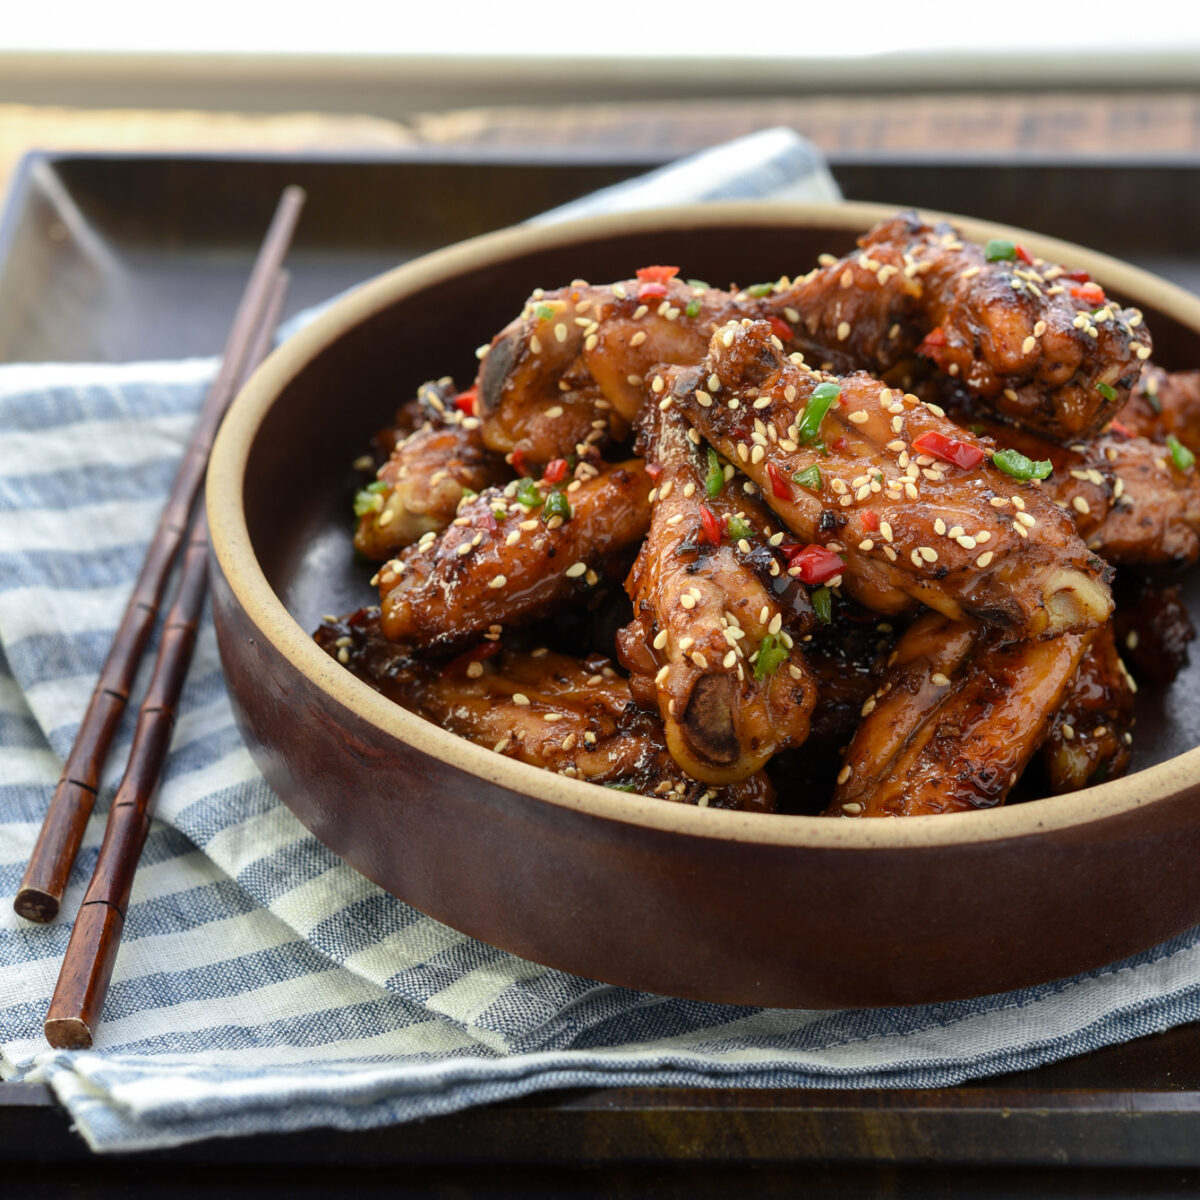 Korean honey garlic chicken is garnished with fresh chilies and served in a bowl on a tray.